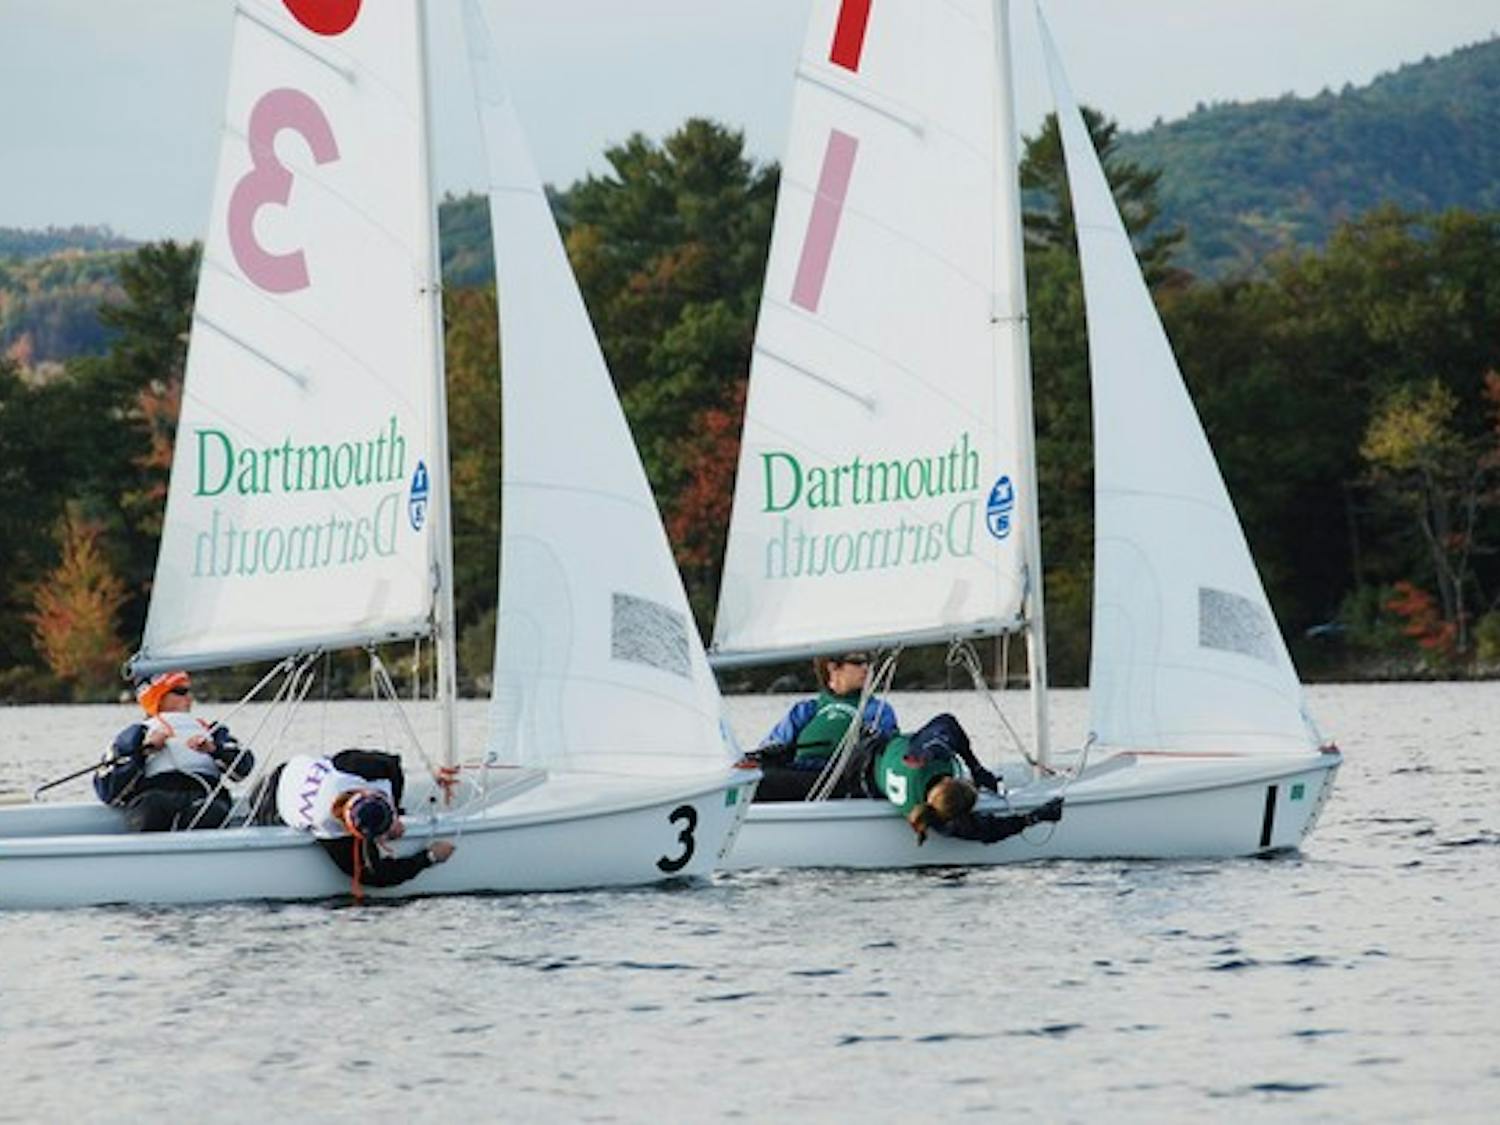 After a strong day of sailing on Saturday, the Big Green slipped in Sunday's sets and finished in 13th place.